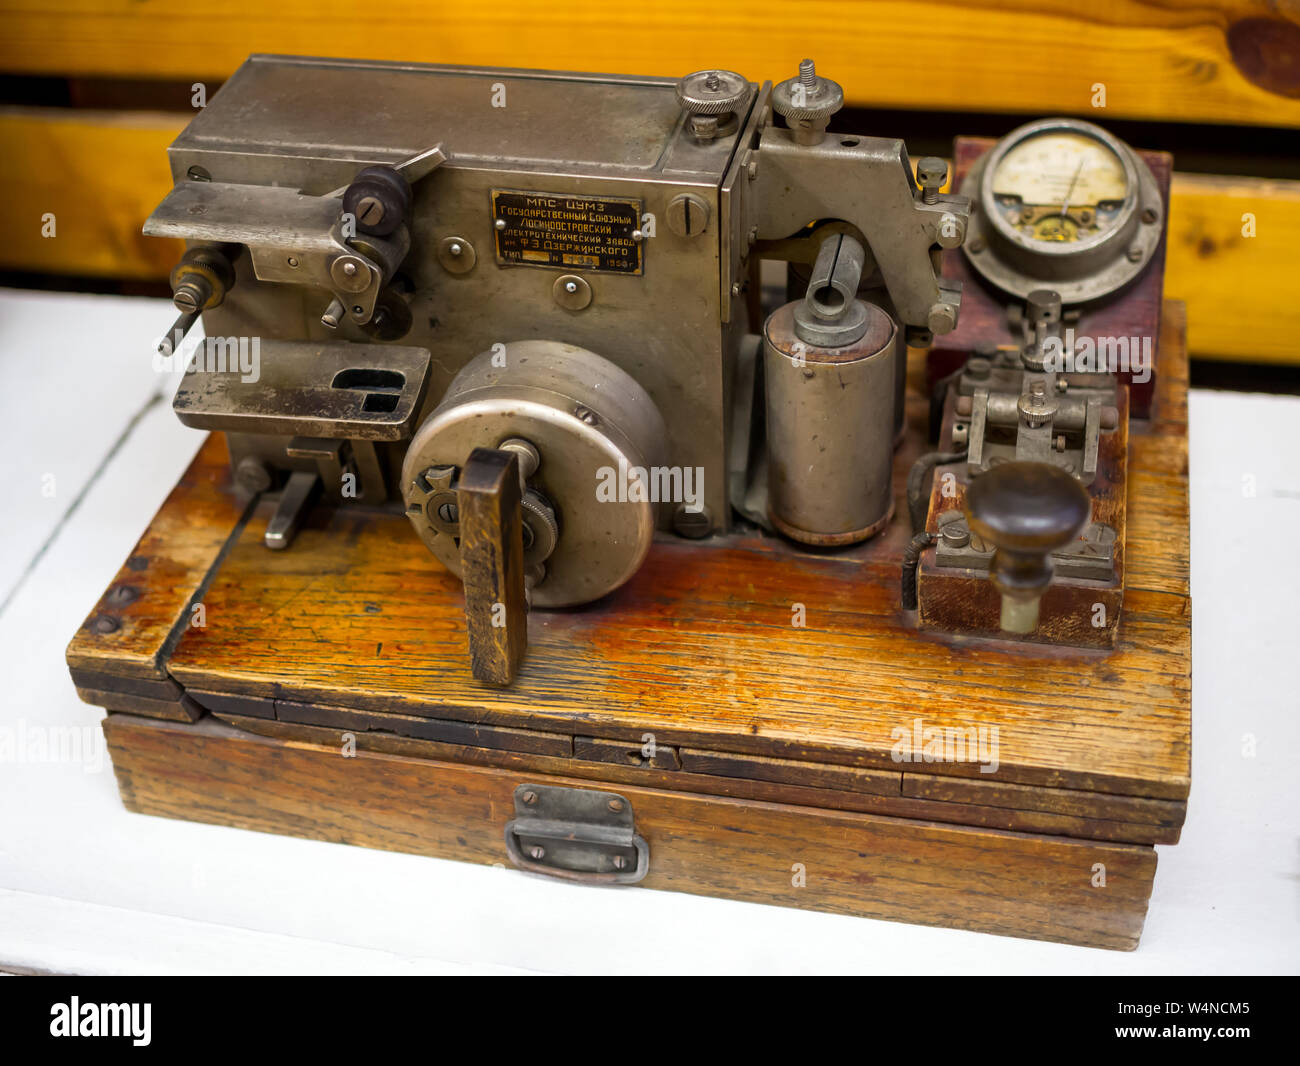 Lodeynoe Pole, Russia - March 29, 2019: Apparatus for transmitting signals by Morse code Stock Photo